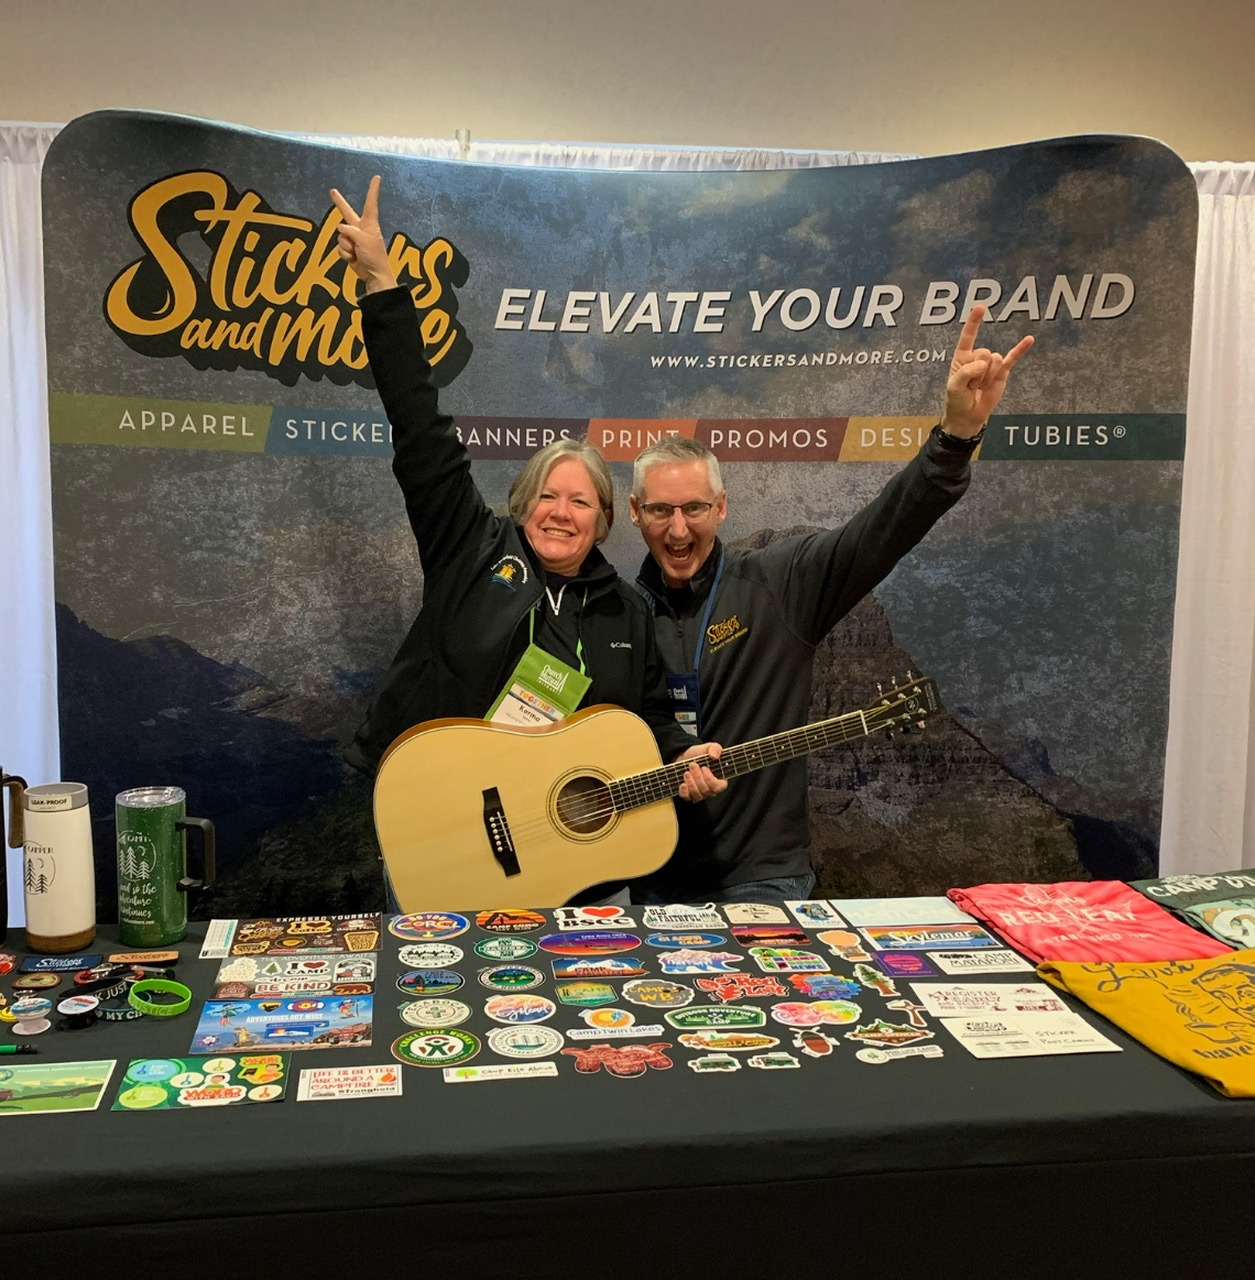 Congrats to Kerma from Lake Springfield Christian Assembly on winning the guitar at the ACA Nationals. So much fun seeing happy faces at our booth. Check out our website and see you we can help you elevate your brand. 
https://stickersandmore.com/camp/
or shoot us an email at info@stickerandmore.com.
@lakespringfieldchristian American Camp Association @acacamps 
#winnerswin #winners #guitar #ACA #acacamps #camplife